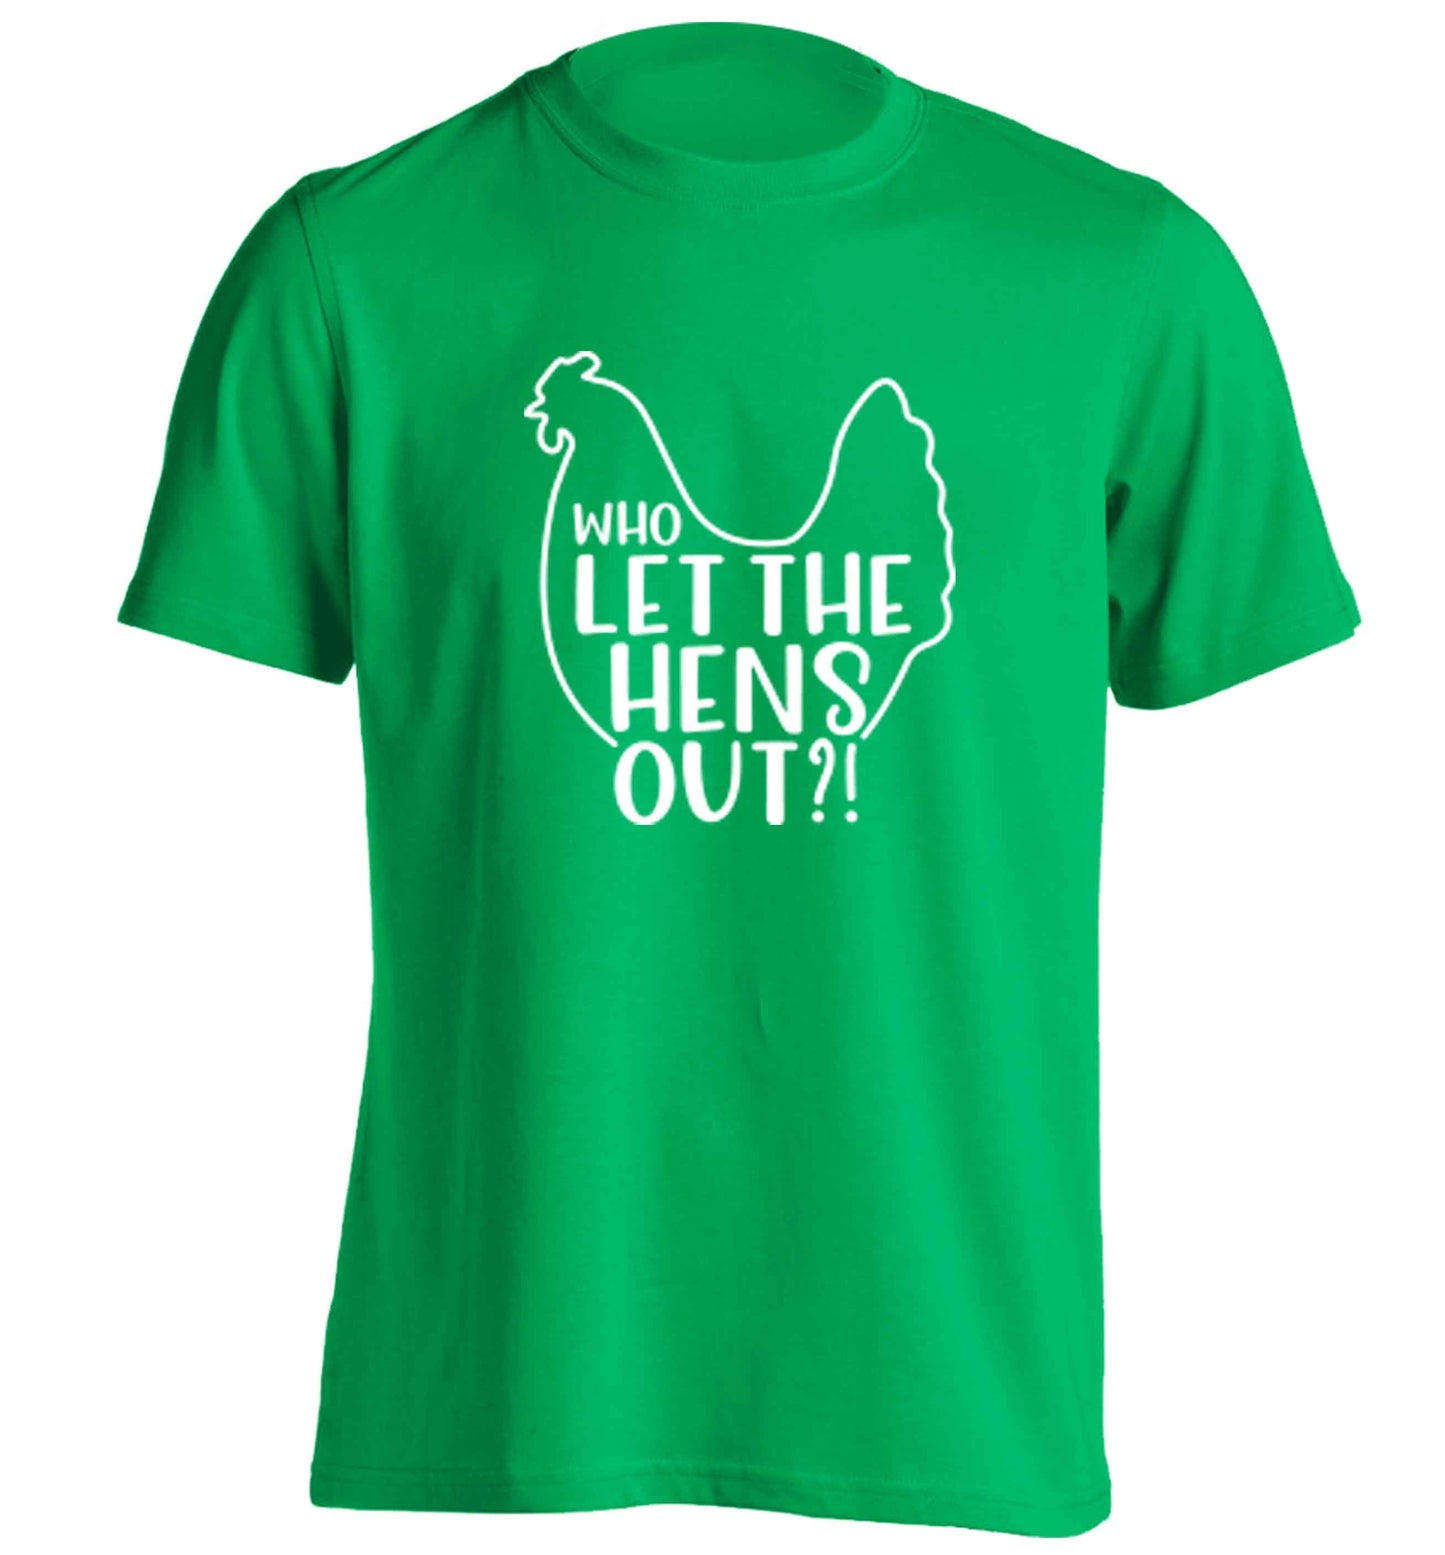 Who let the hens out adults unisex green Tshirt 2XL